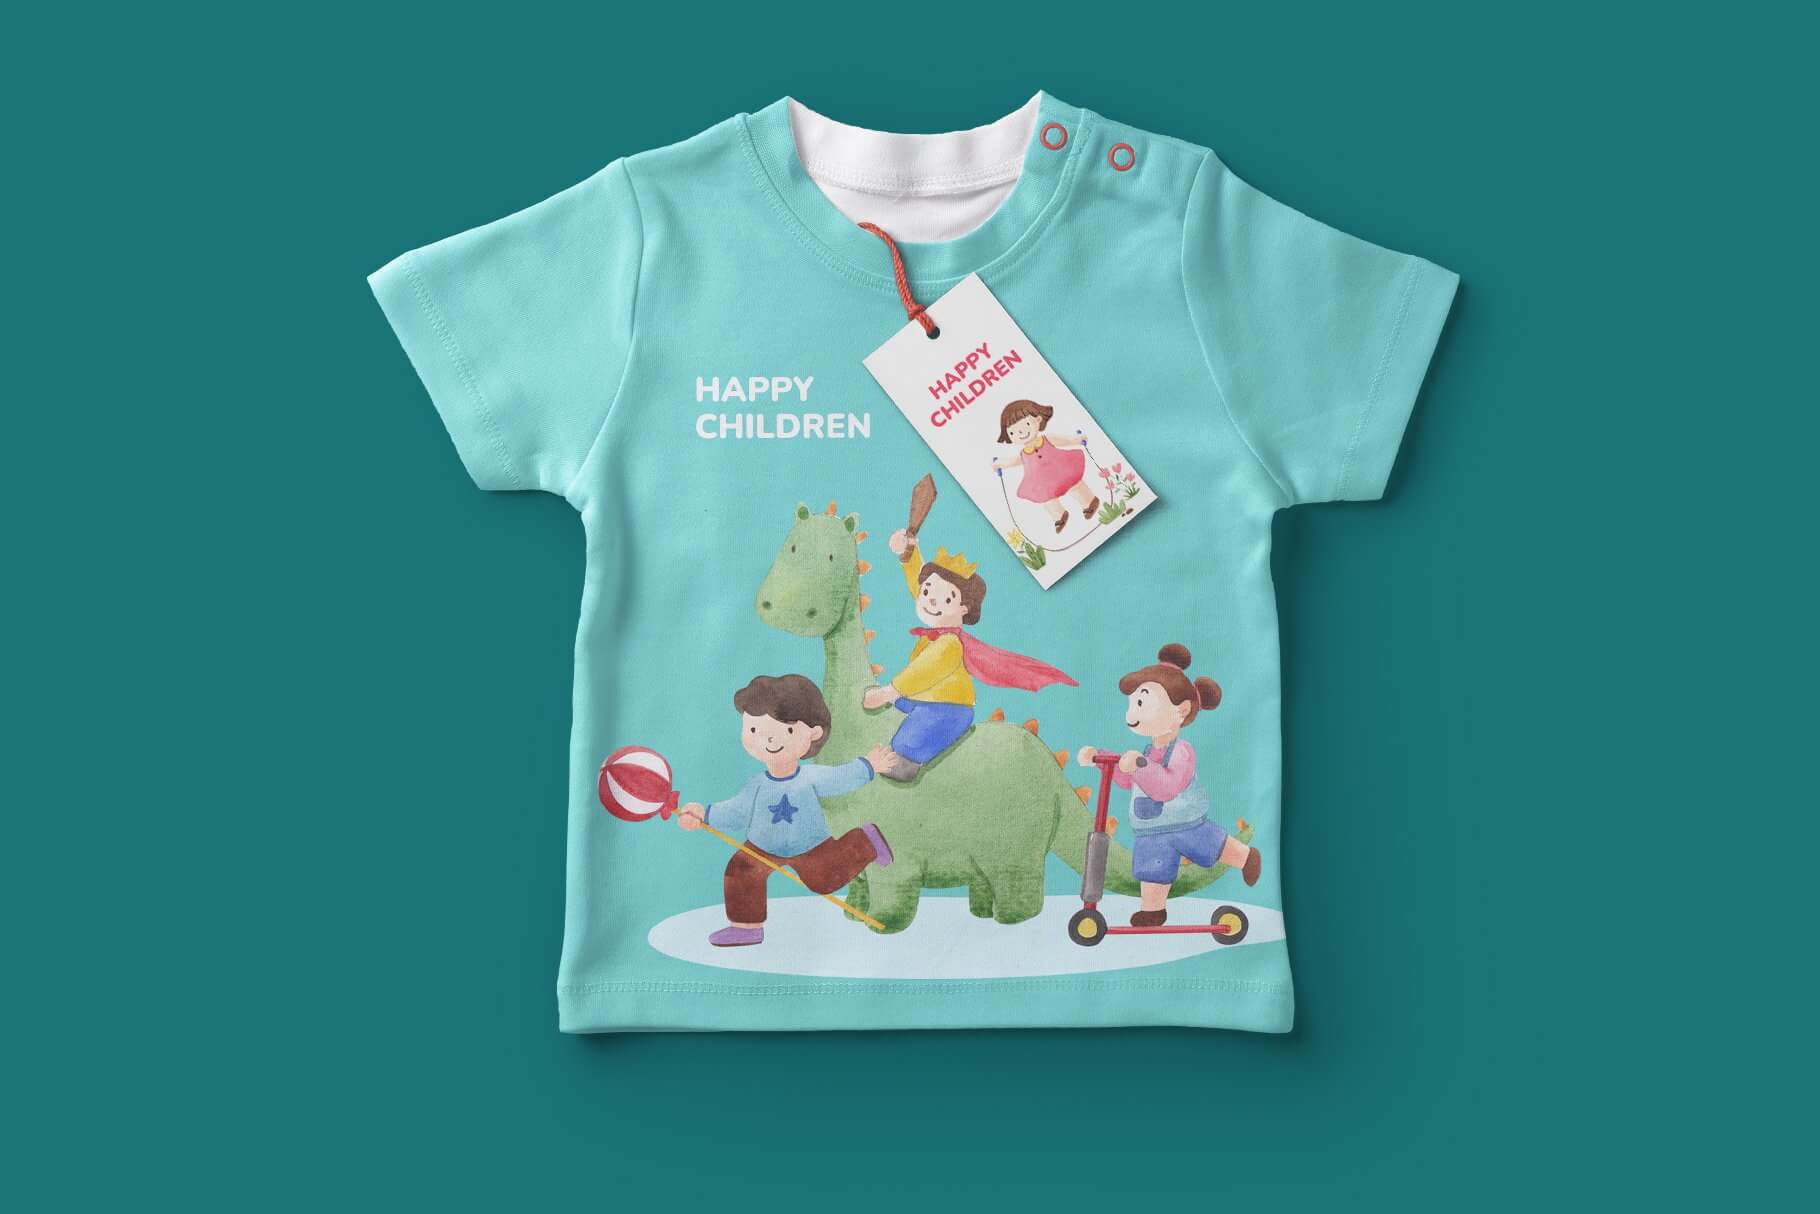 happy children spring watercolor illustration child clothes example.